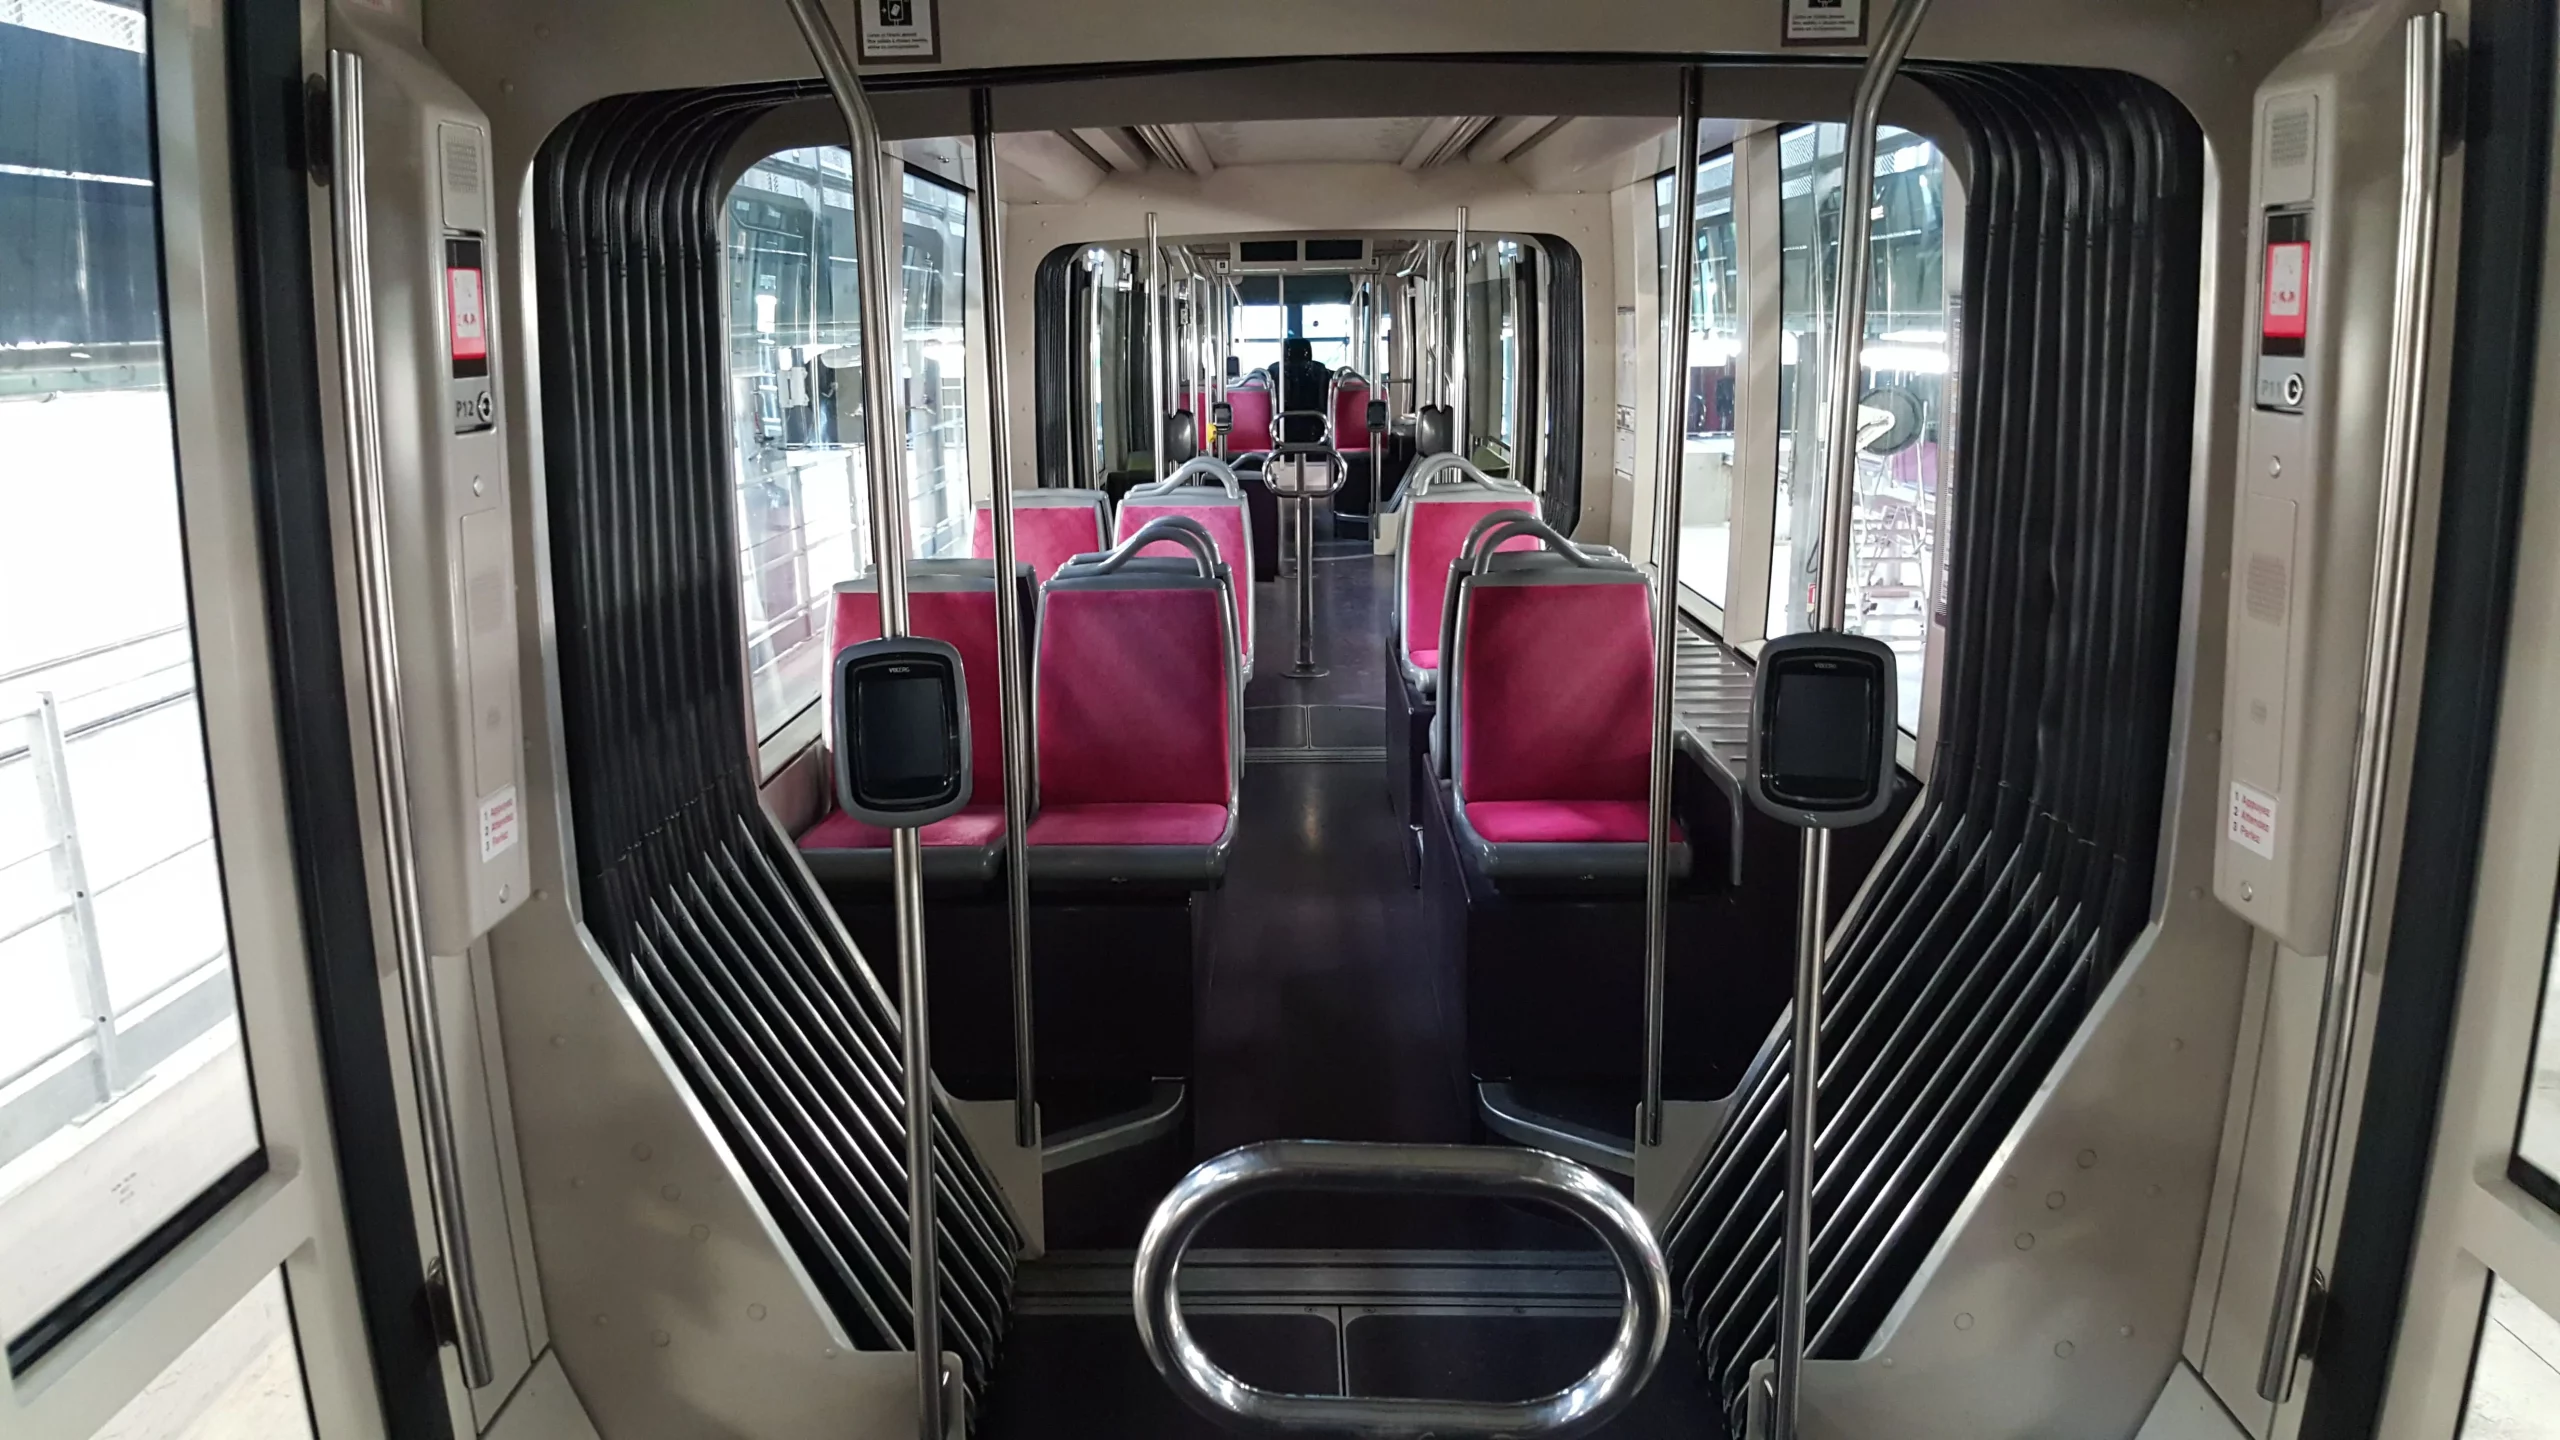 Read more about the article Dijon – Modification studies of the Citadis 302 tramway interior diagram